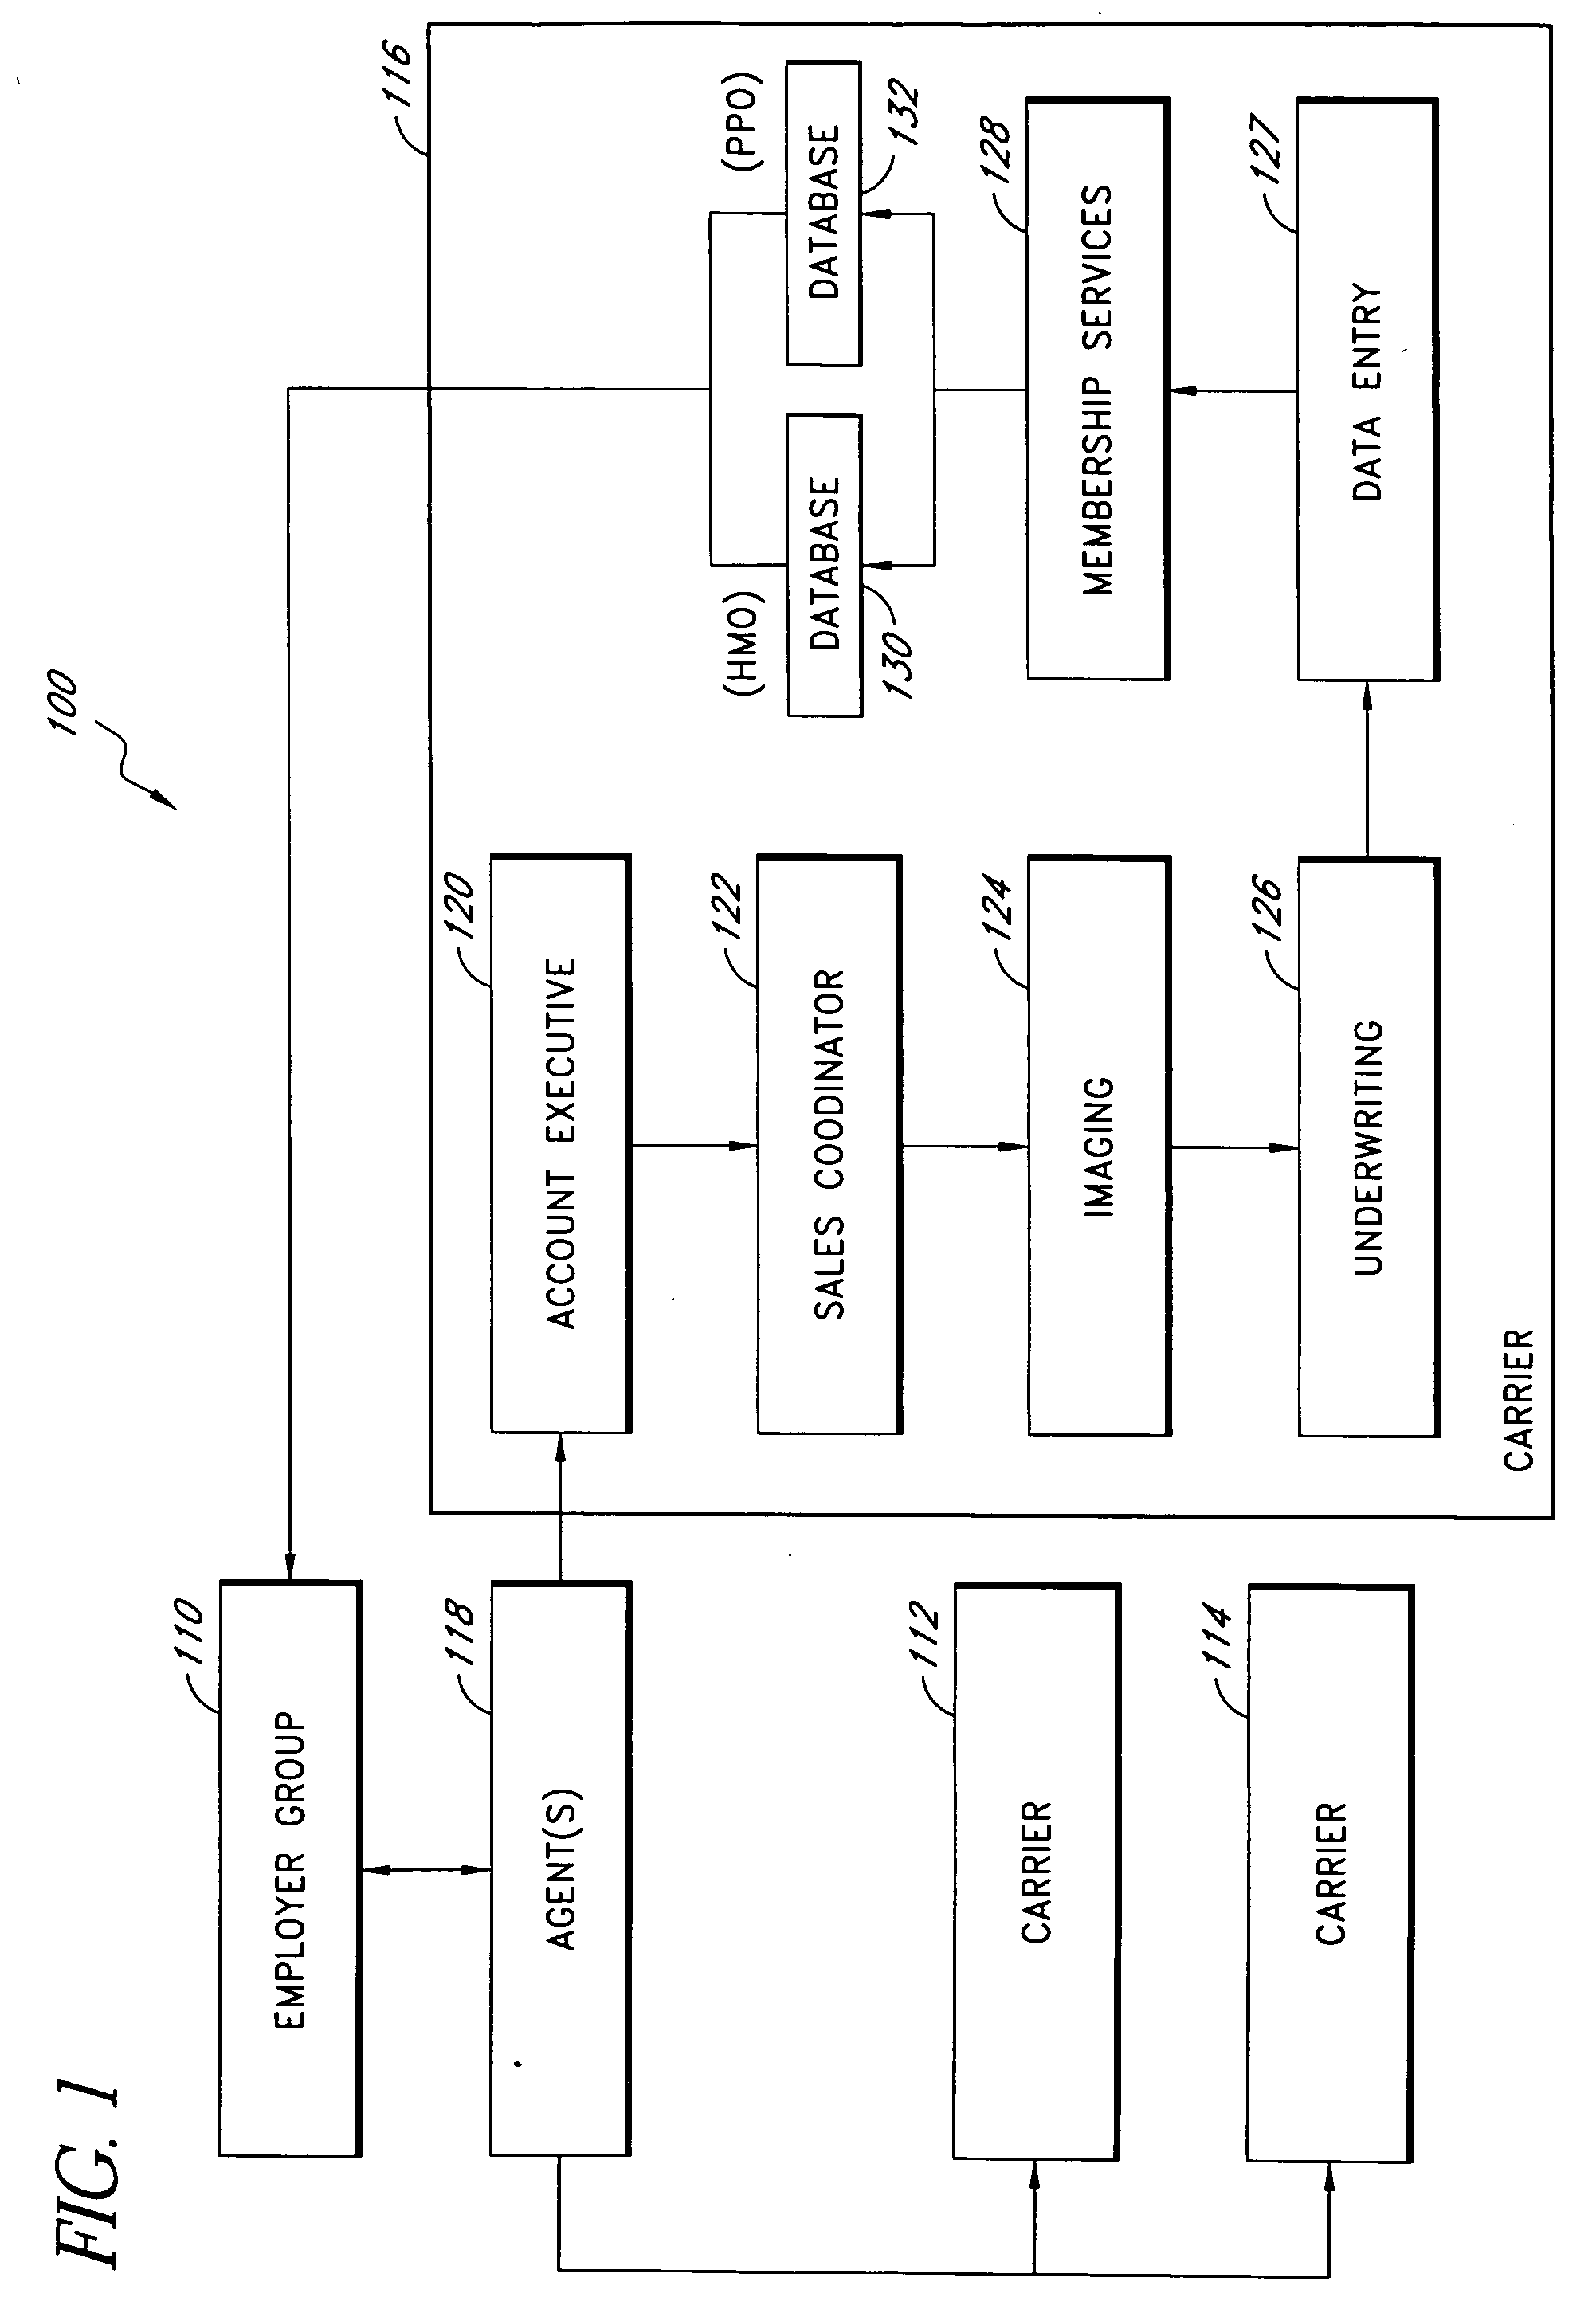 Systems and methods for automating the capture, organization, and transmission of data